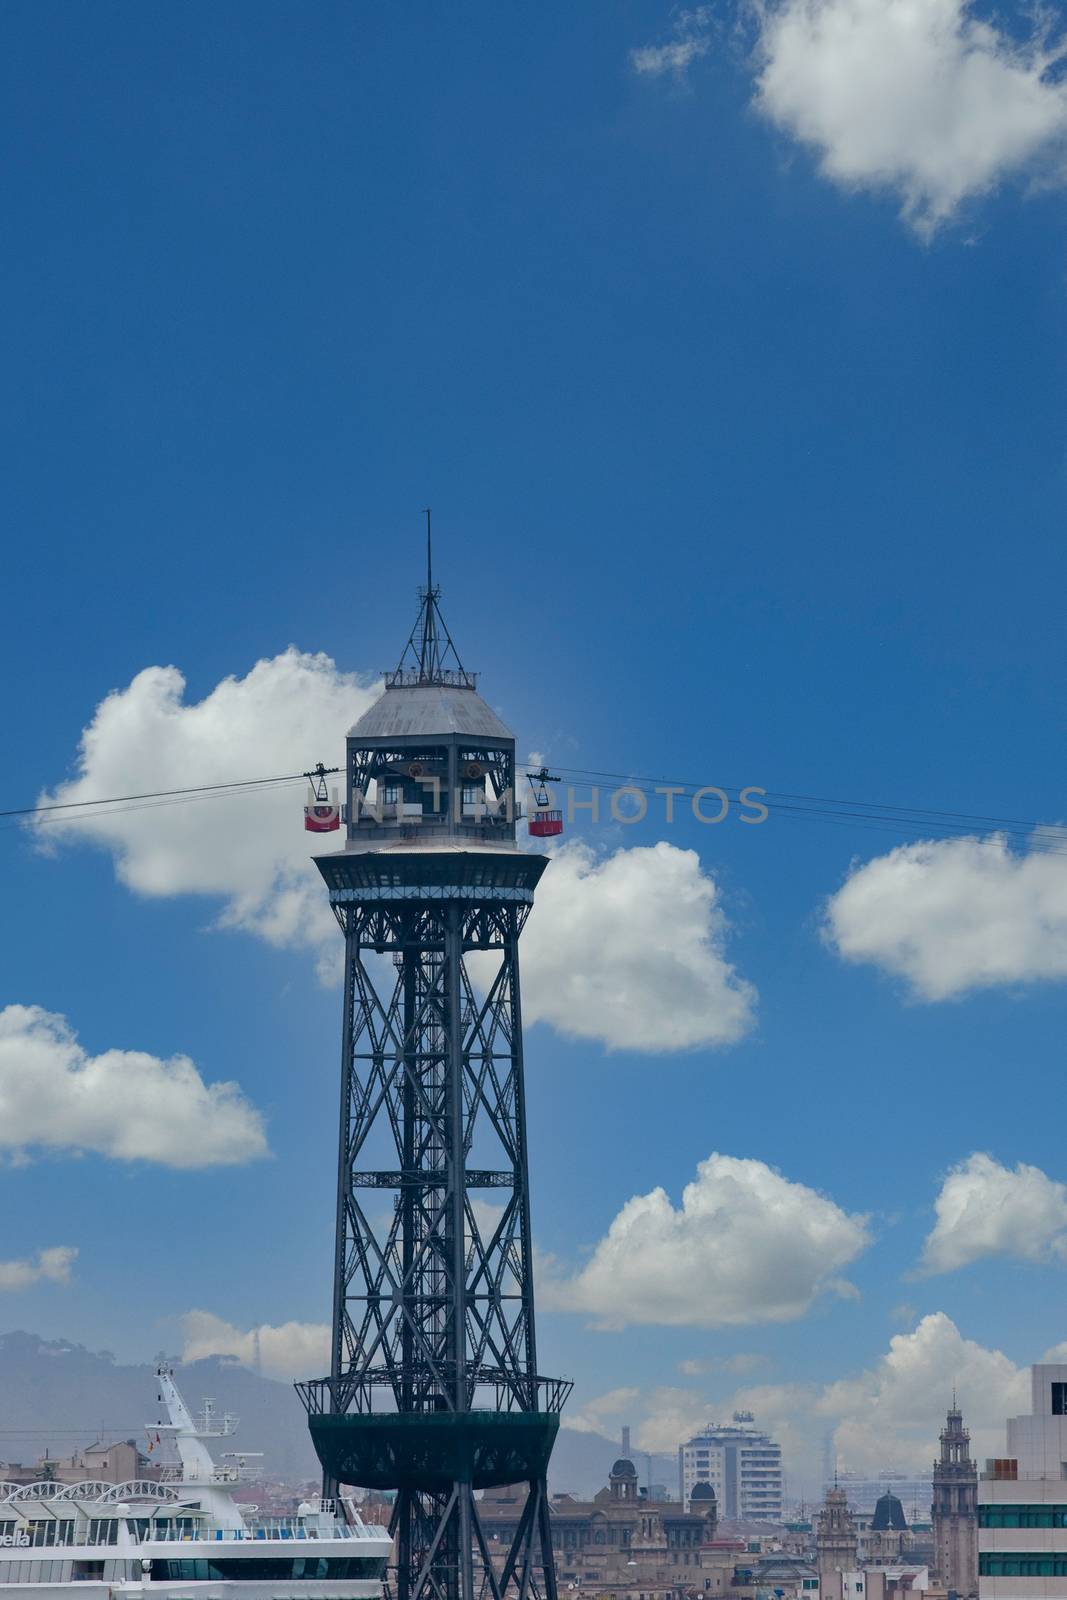 A skylift with two cars against a  cloudy sky in Barcelona Spain